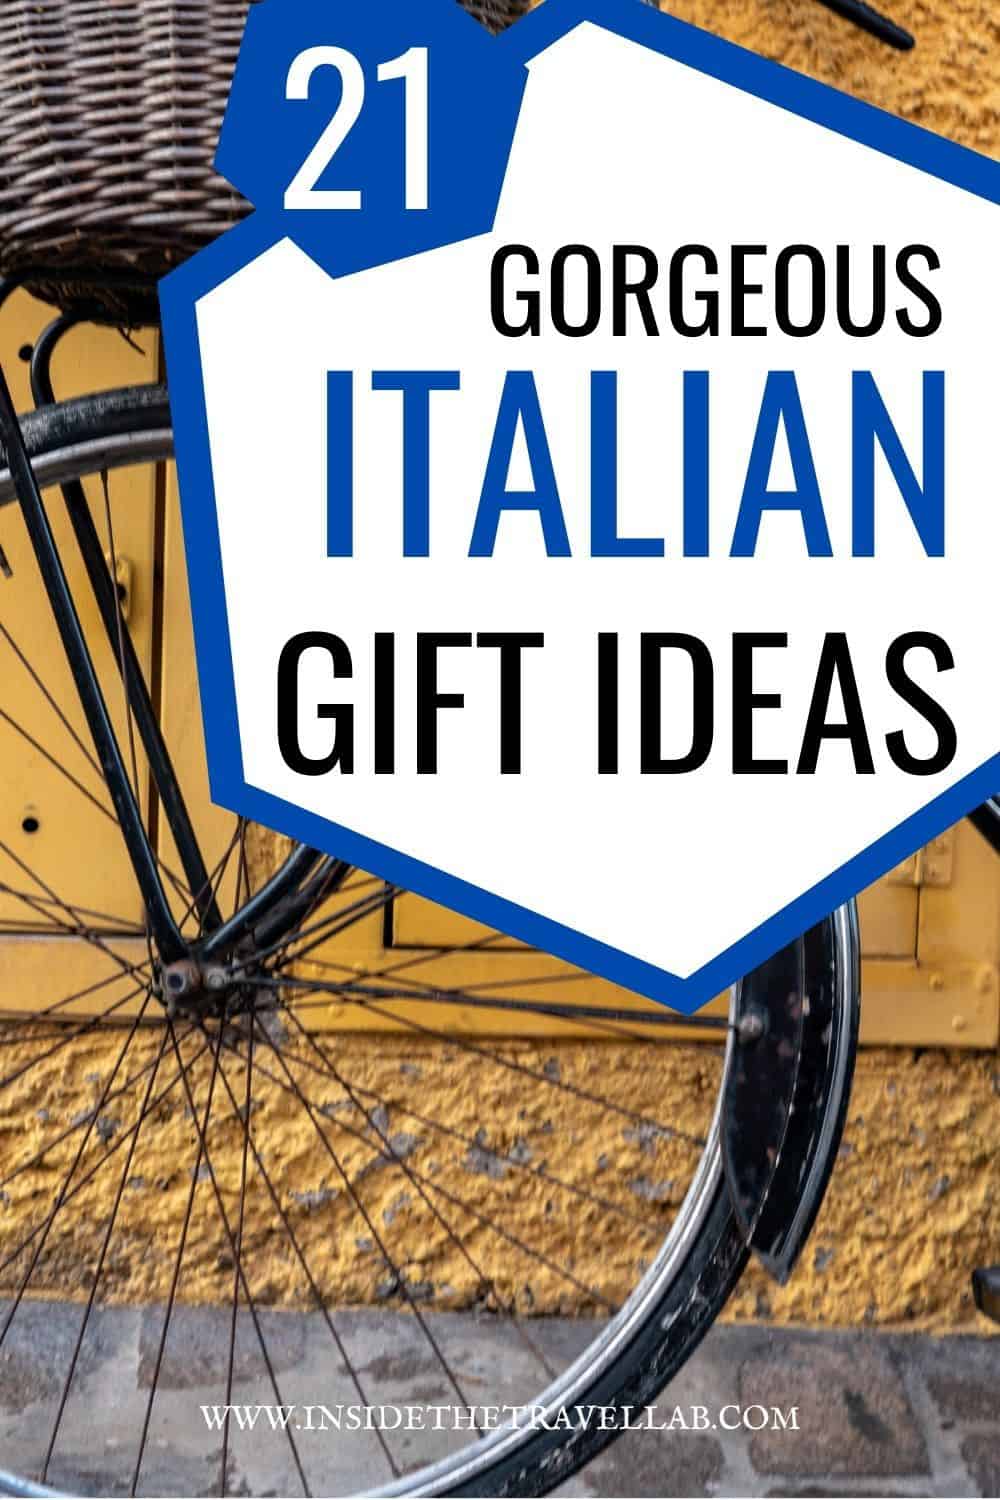 21 Gorgeous Italian Gift Ideas for Italy Lovers Cover Image